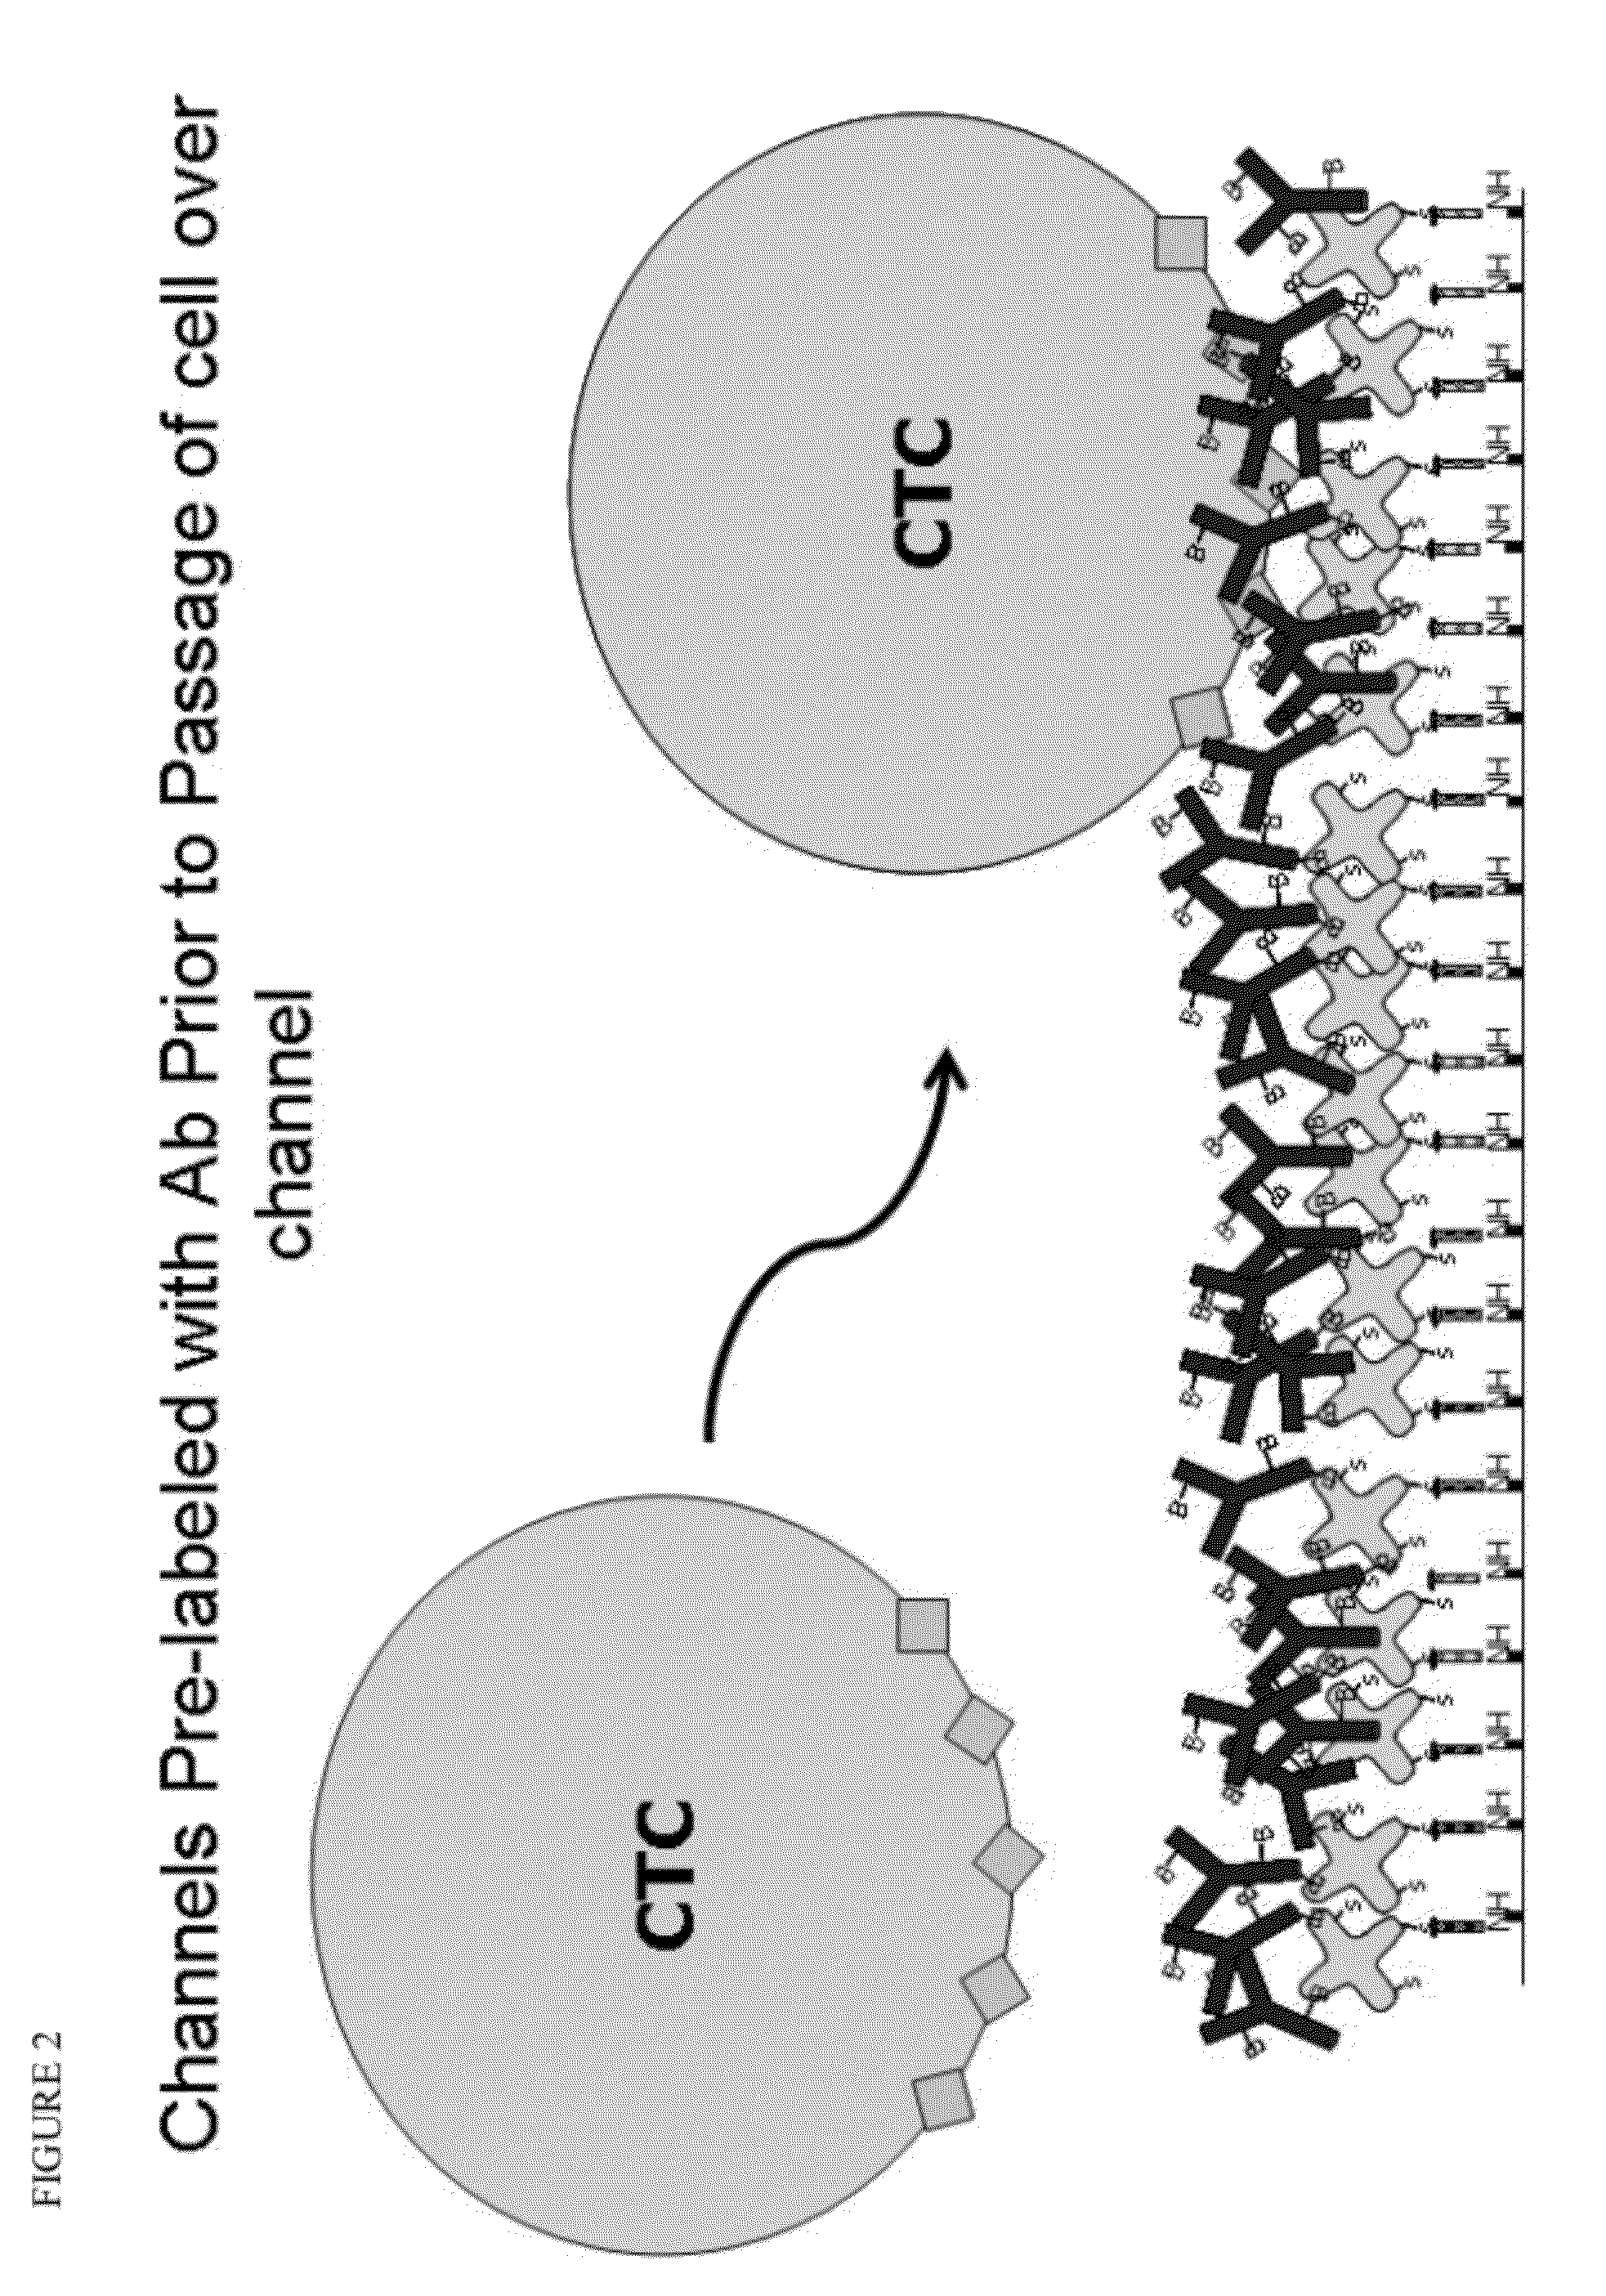 Devices and methods of cell capture and analysis